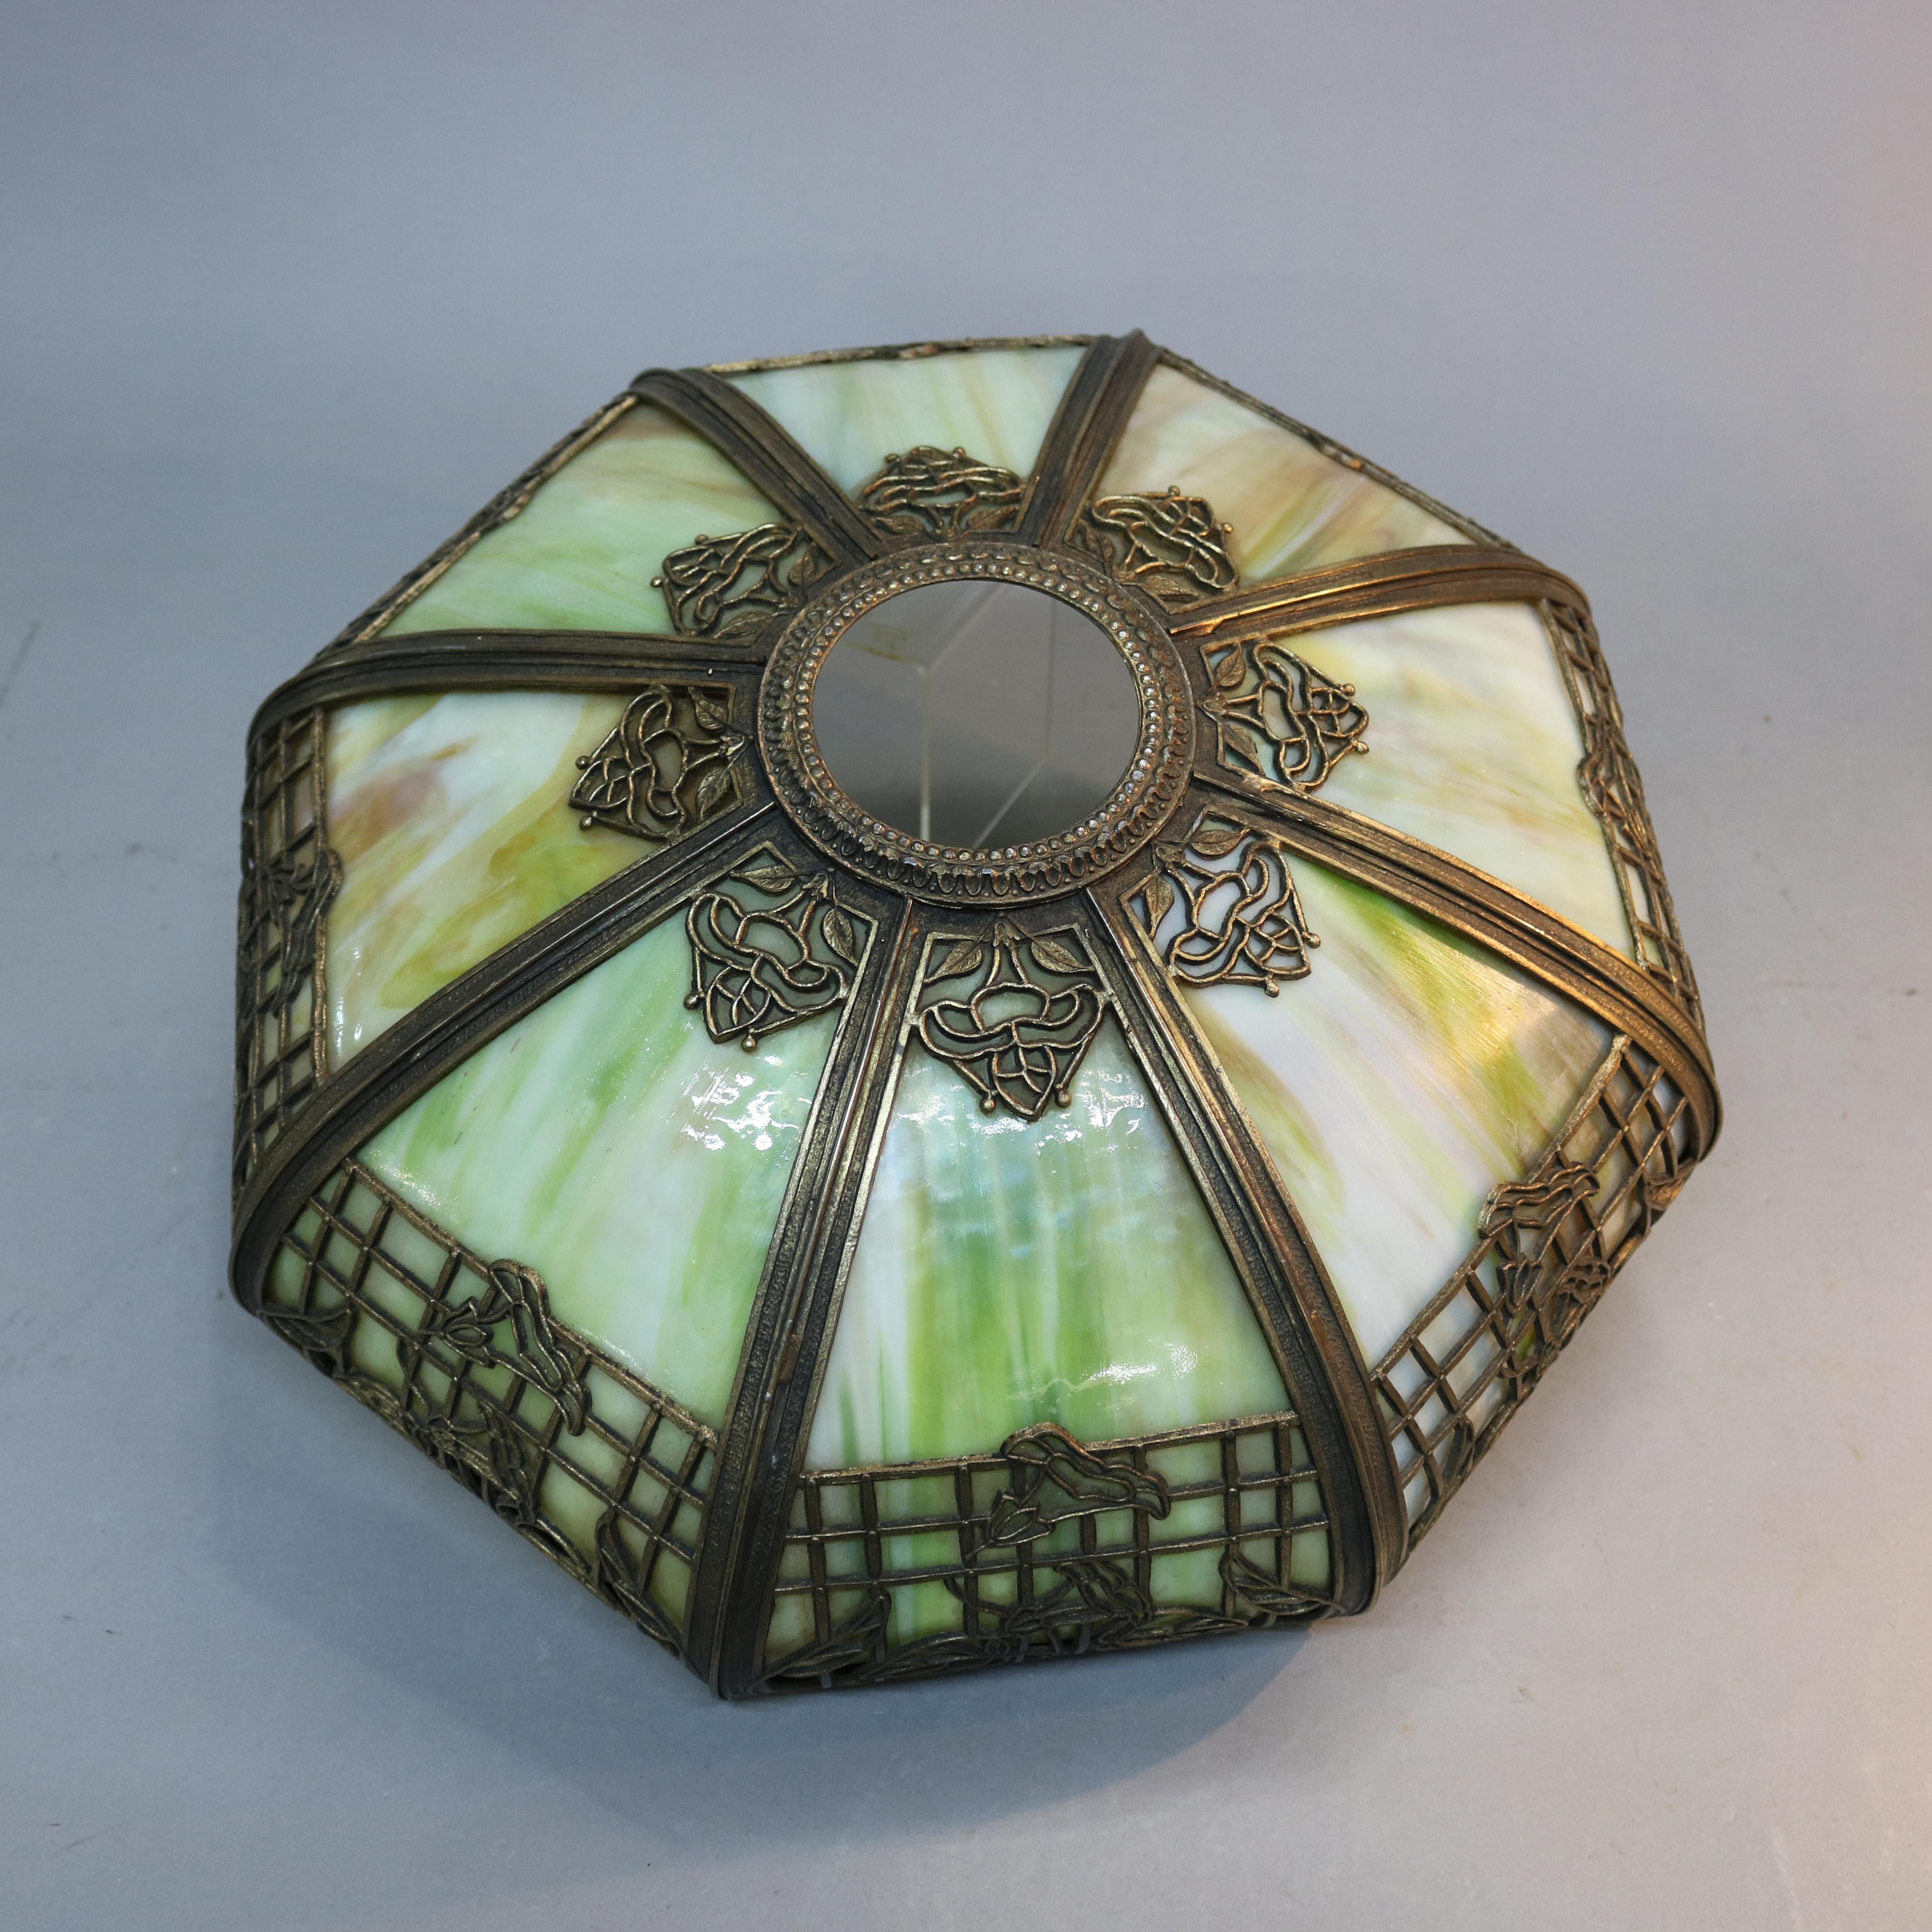 An antique Arts & Crafts table lam offers paneled cast shade with floral and foliate filigree designing housing bent slag glass surmounting cast base, circa 1920.

Measures: 22